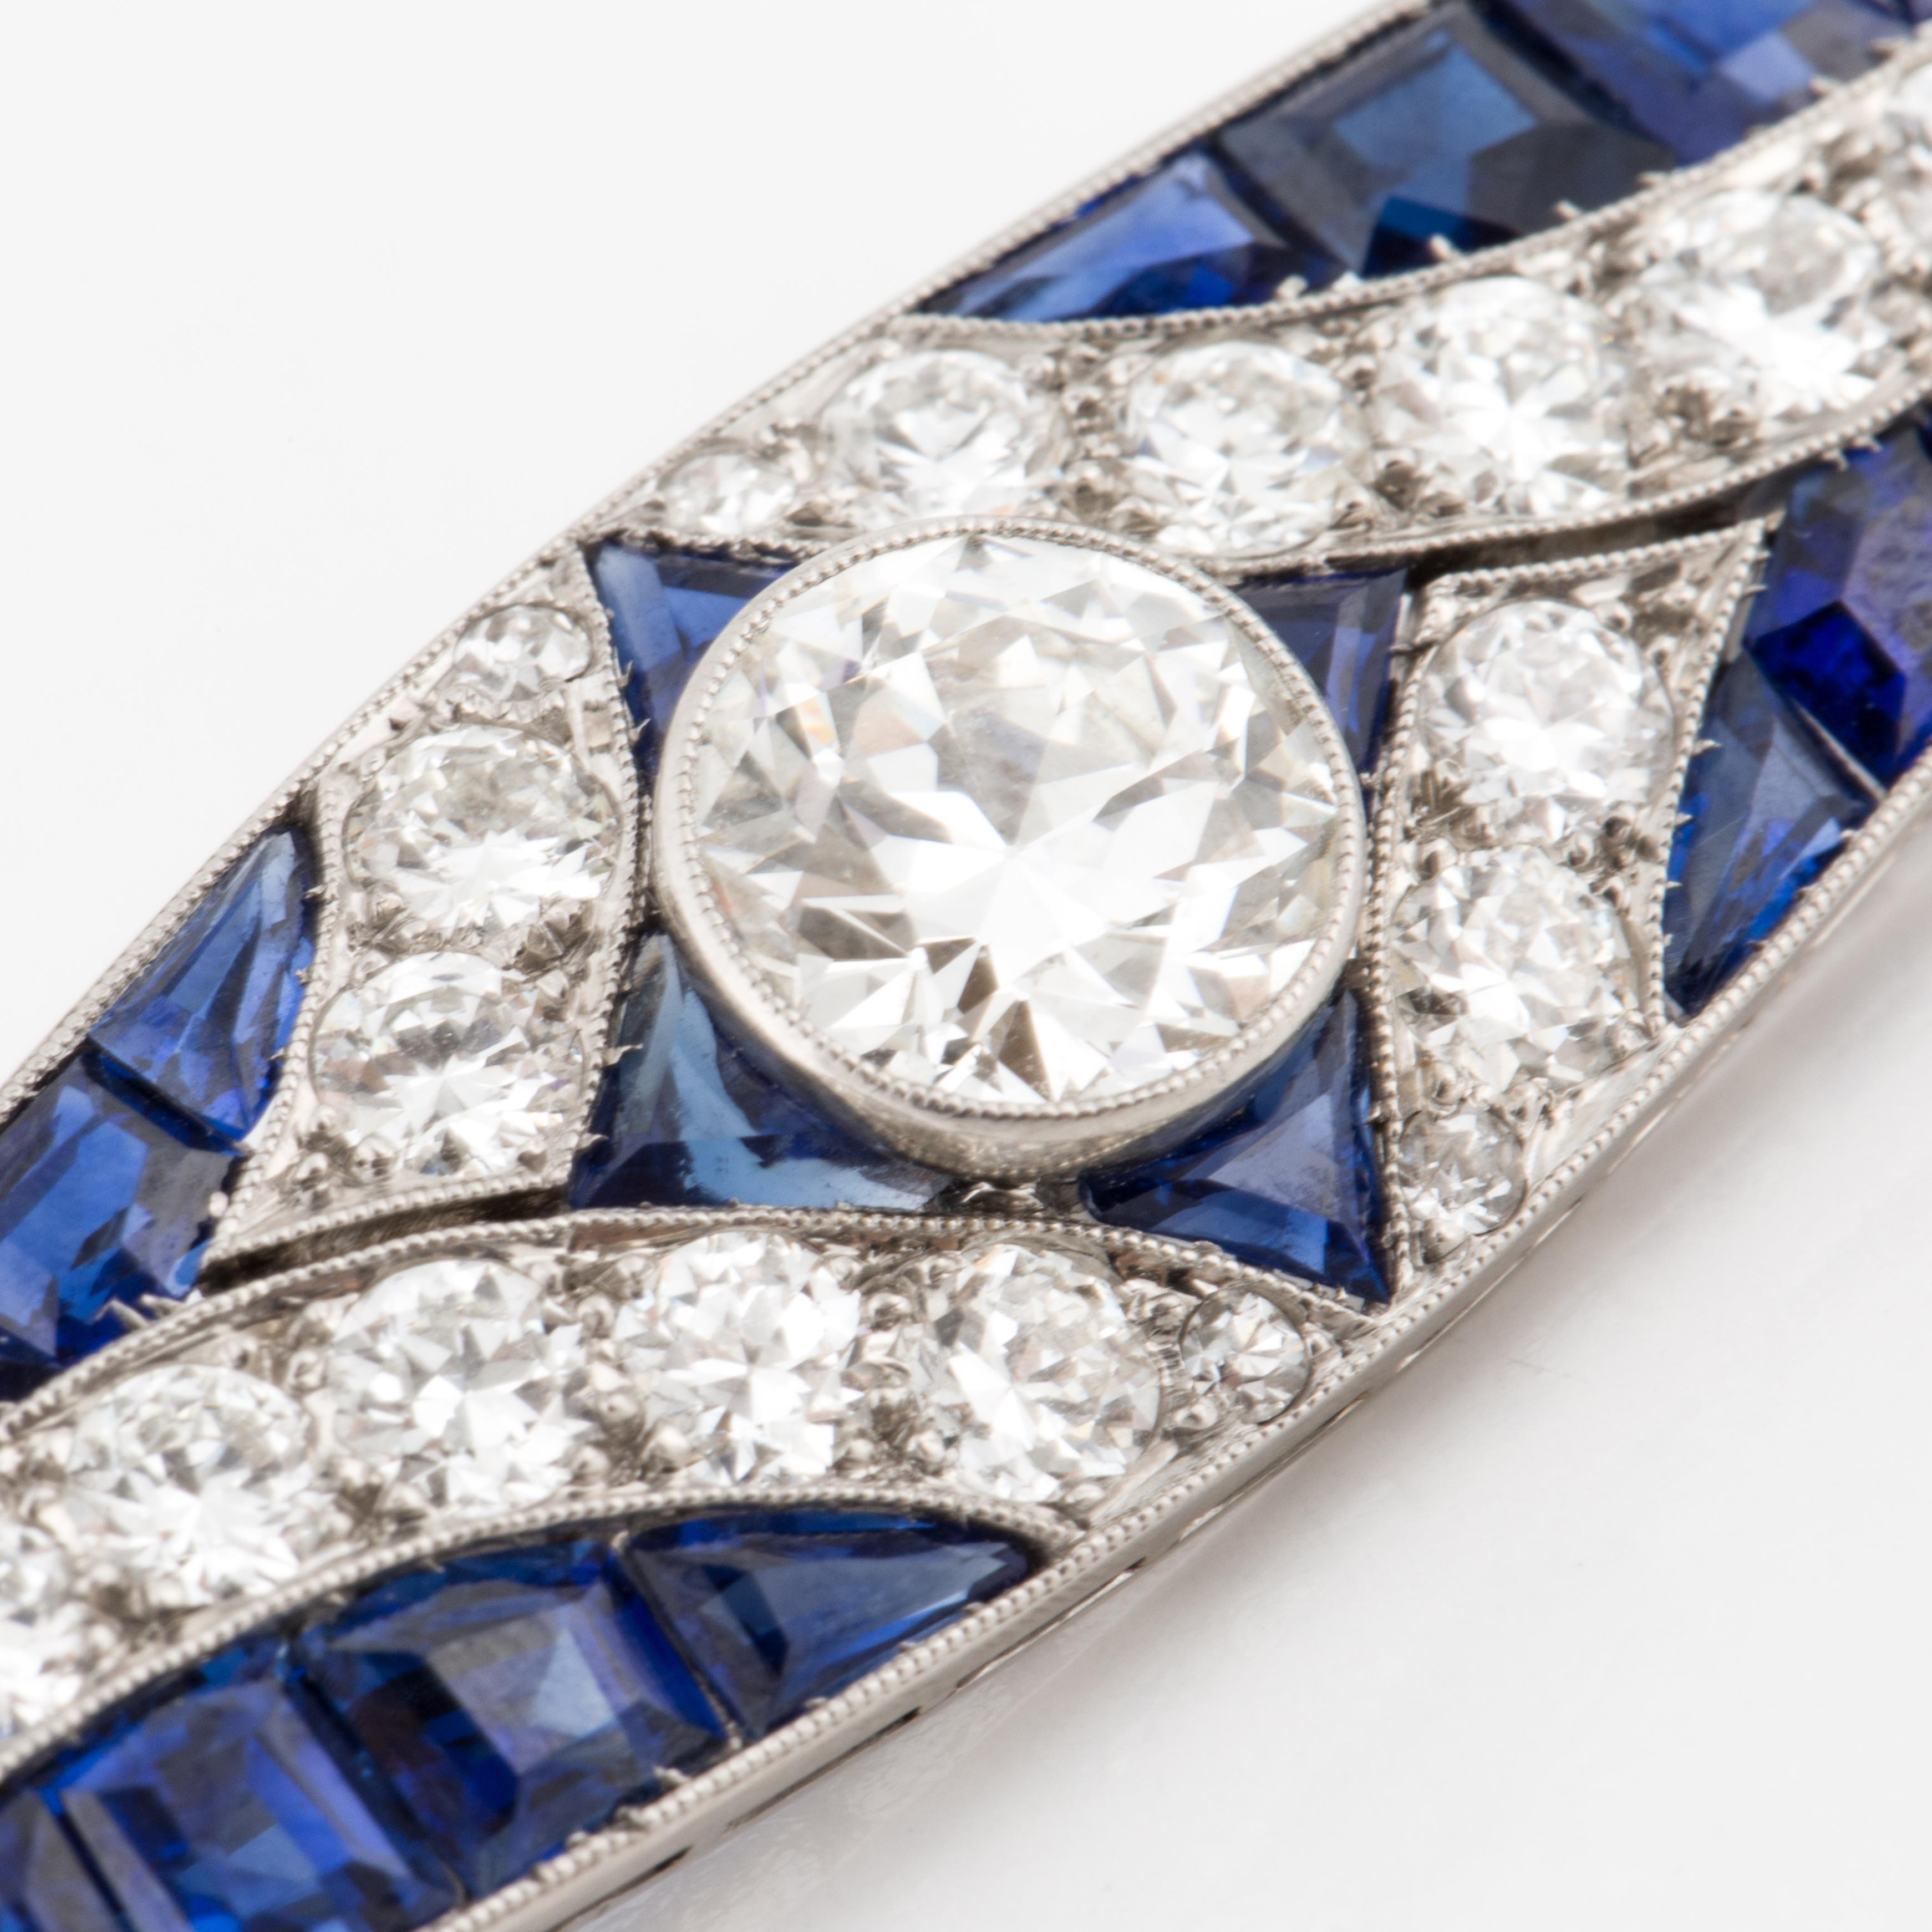 Art Deco bar pin composed of platinum with sapphires and diamonds.  There is one larger Old European-cut diamond in the center of the pin with bead-set diamond accents and calibré-cut sapphires. The center diamond is 1.70 carats, J color, VS1